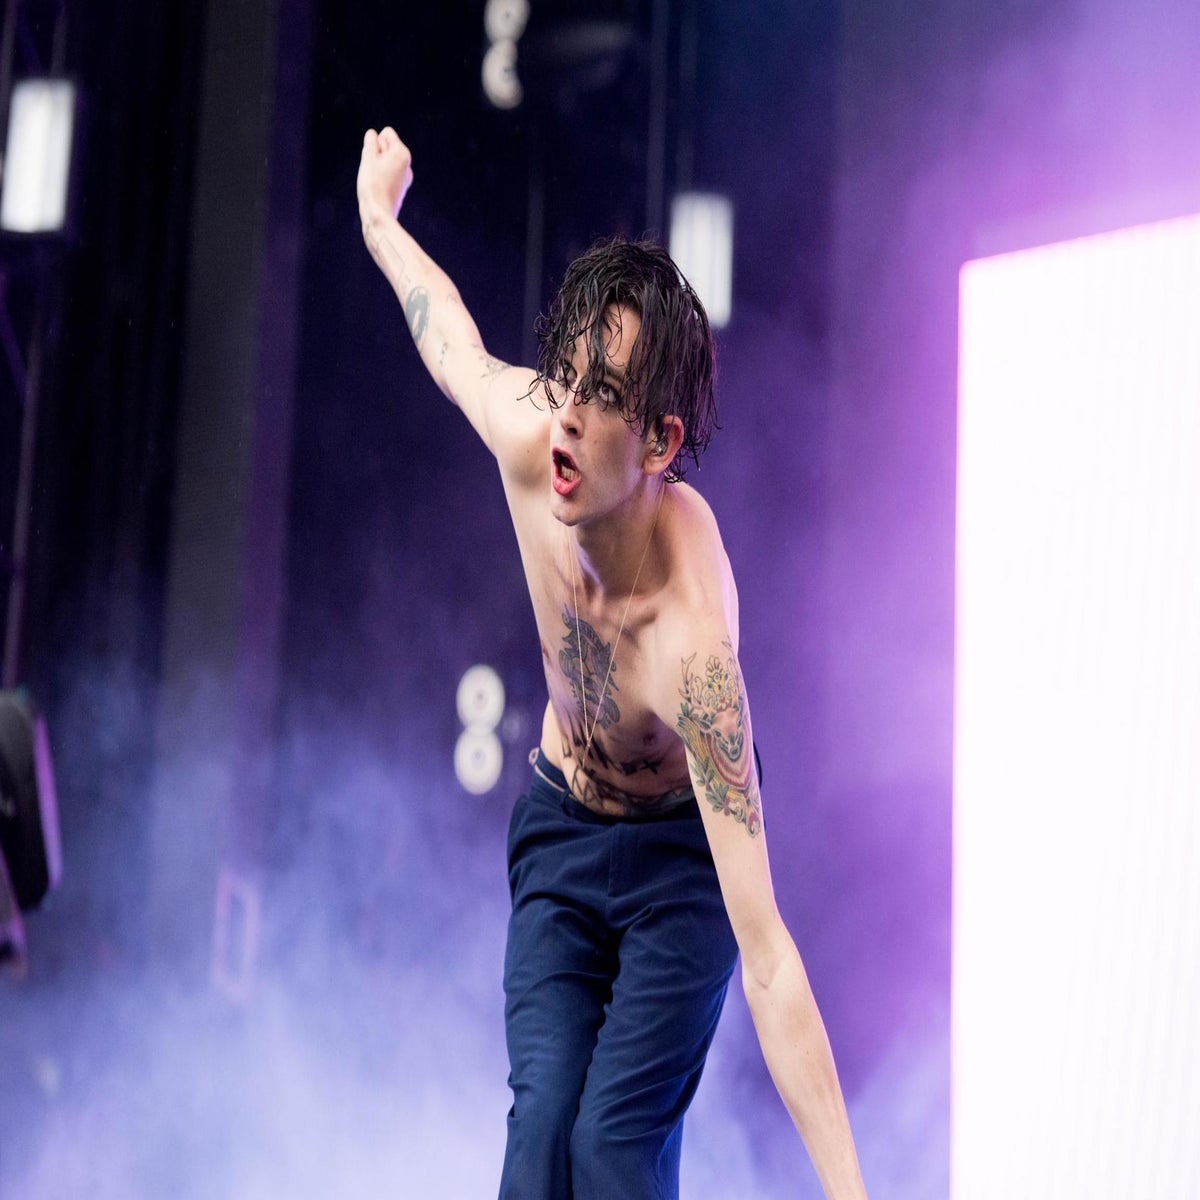 The Week In Pop: In Praise Of Pop-Not-Rock Bands The 1975 And The